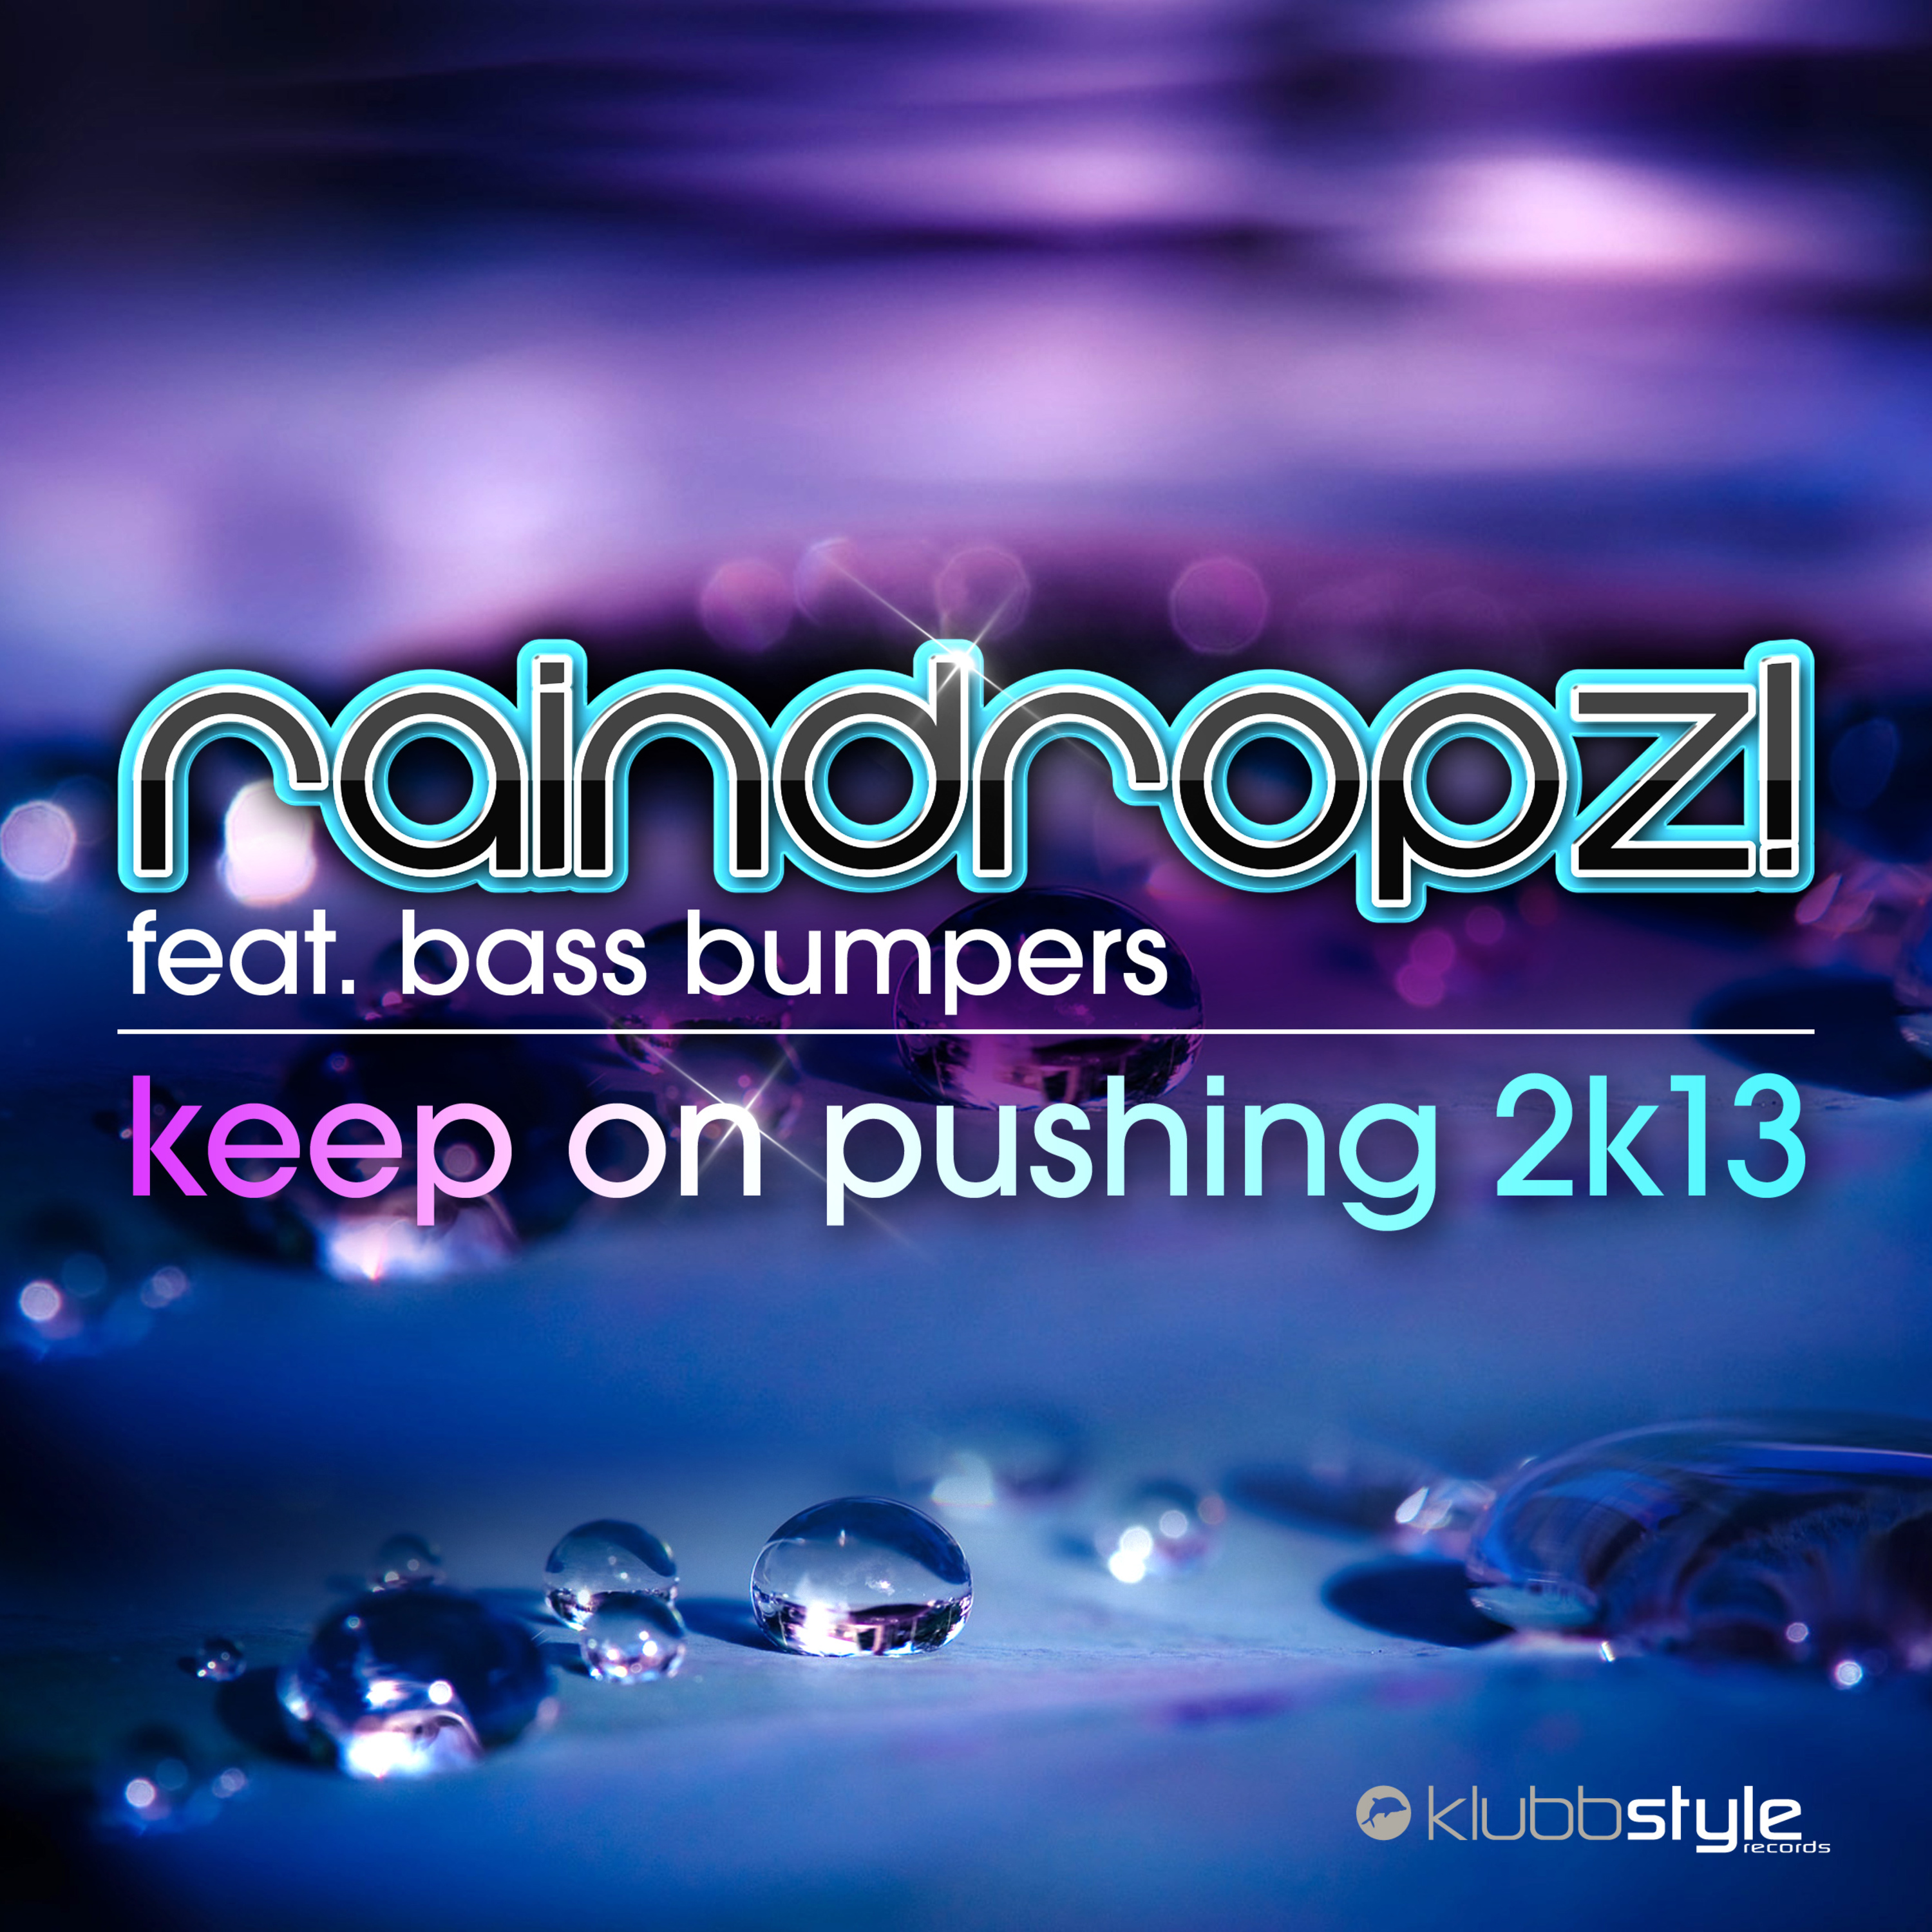 Bass bumpers. Bass Bumpers keep on pushing. Keep on pushing. Raindropz!. Bass Bumpers Remix.